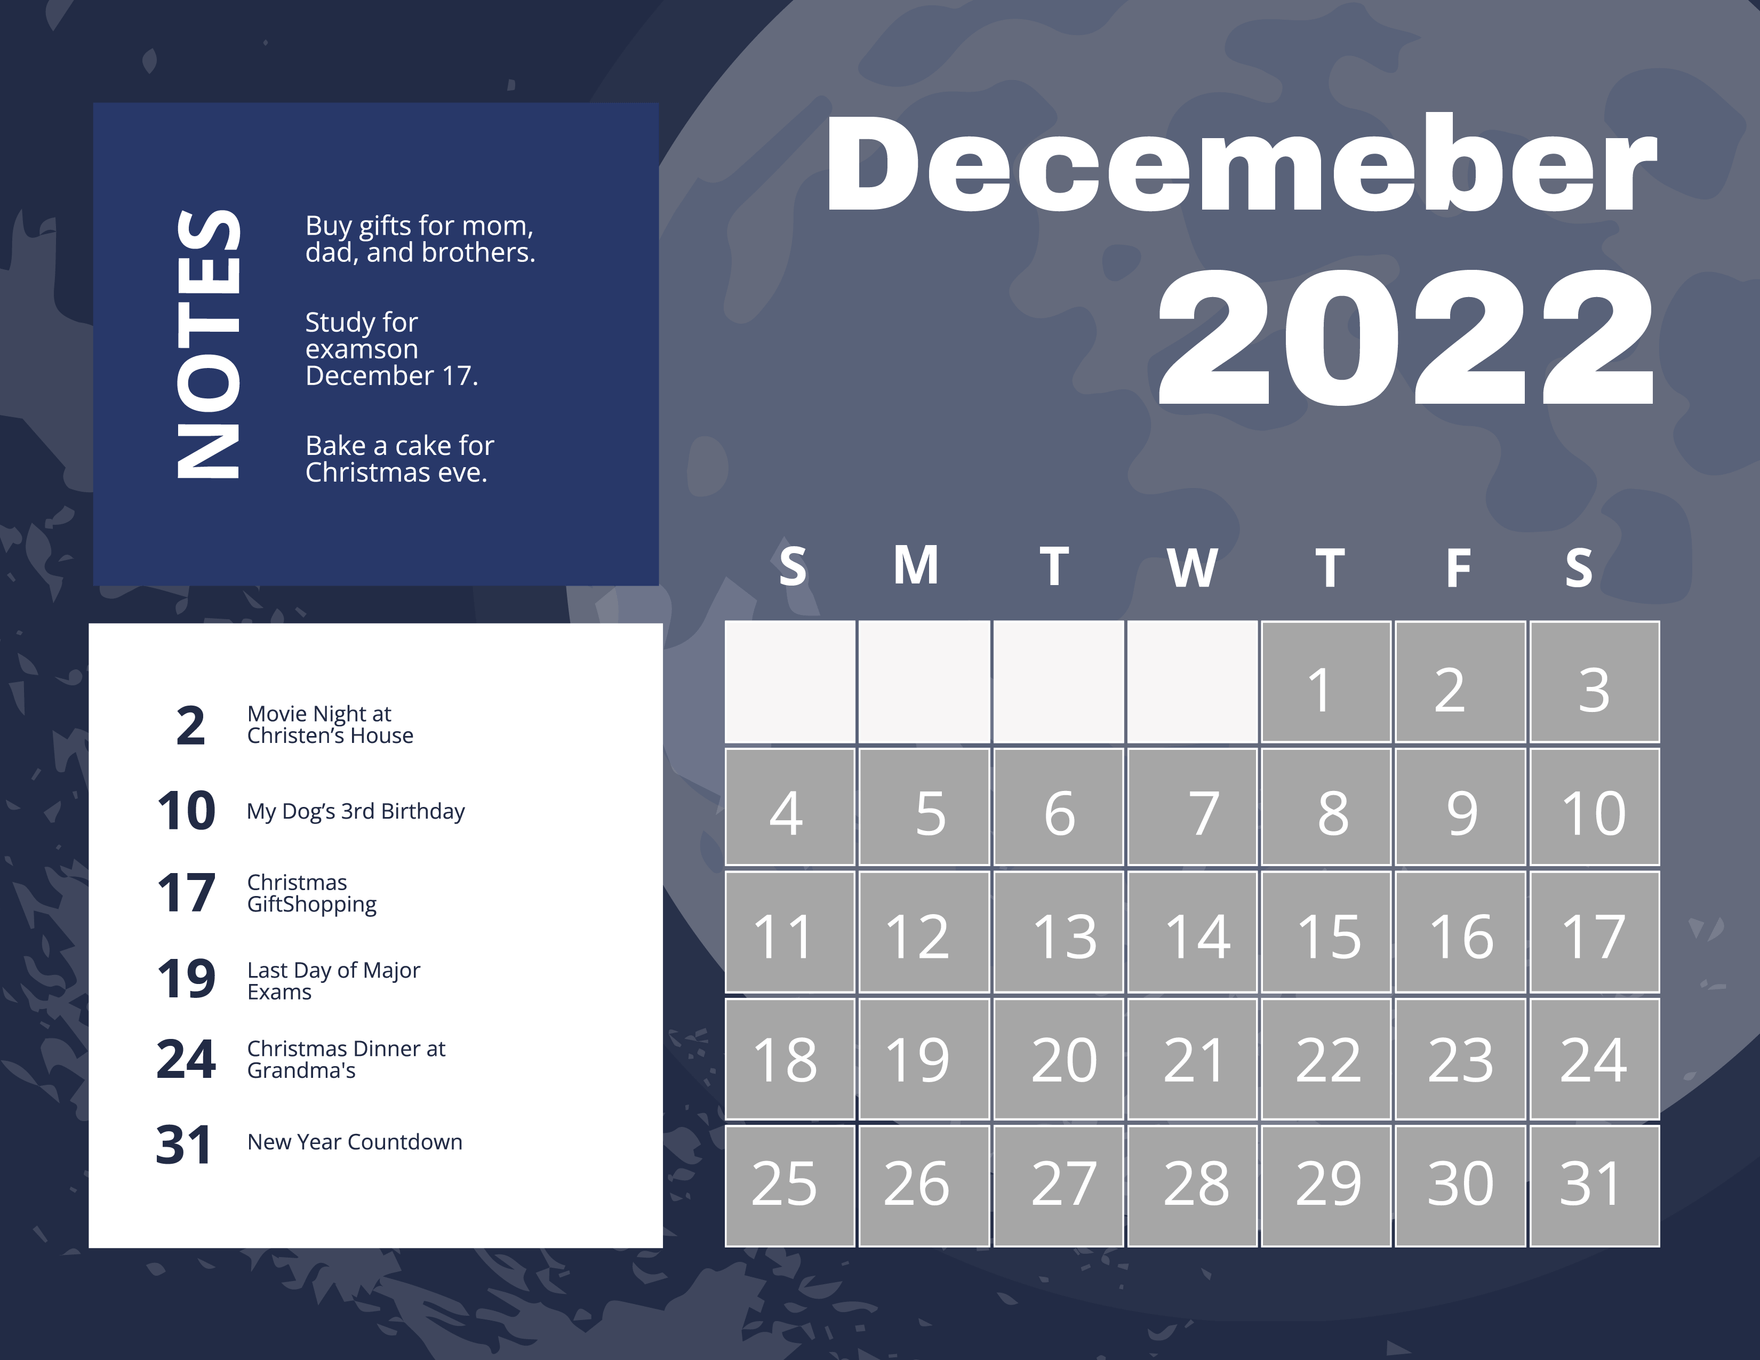 December 2022 Calendar Template With Moon Phases